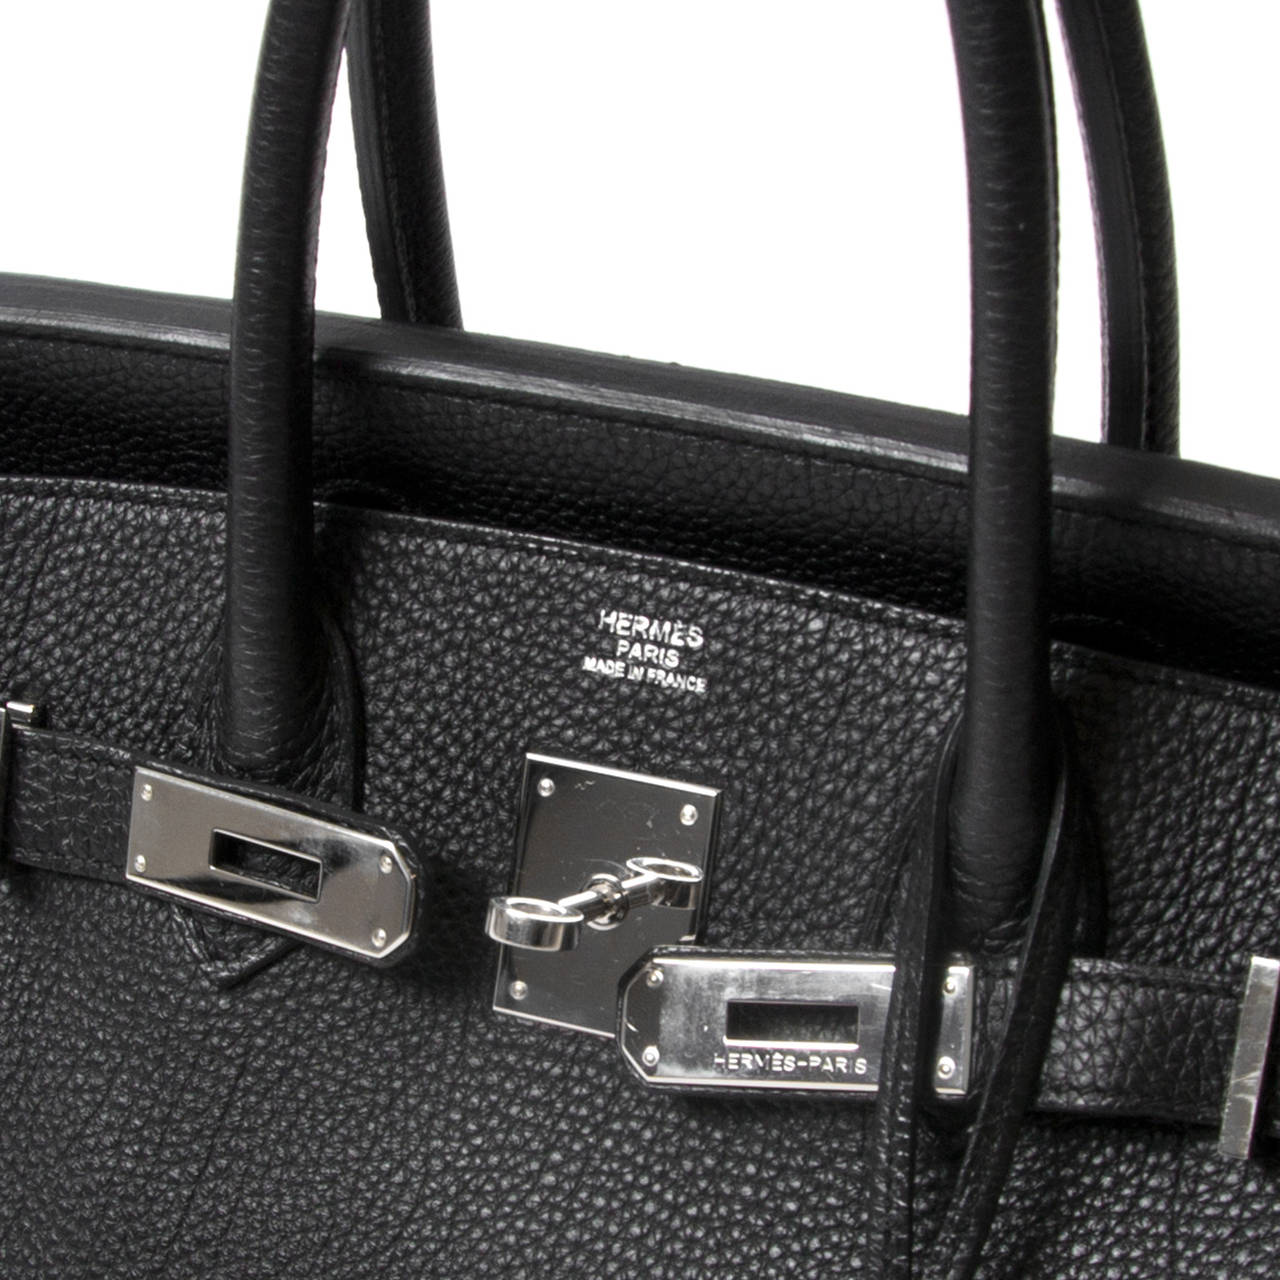 Hermes Birkin 30cm Togo Black PHW
Hermes Black togo leather Birkin 30cm with tonal stitching, palladium hardware, clochette with lock and two keys, black chevre lining with one zip pocket with Hermes engraved pull and open pocket on opposite